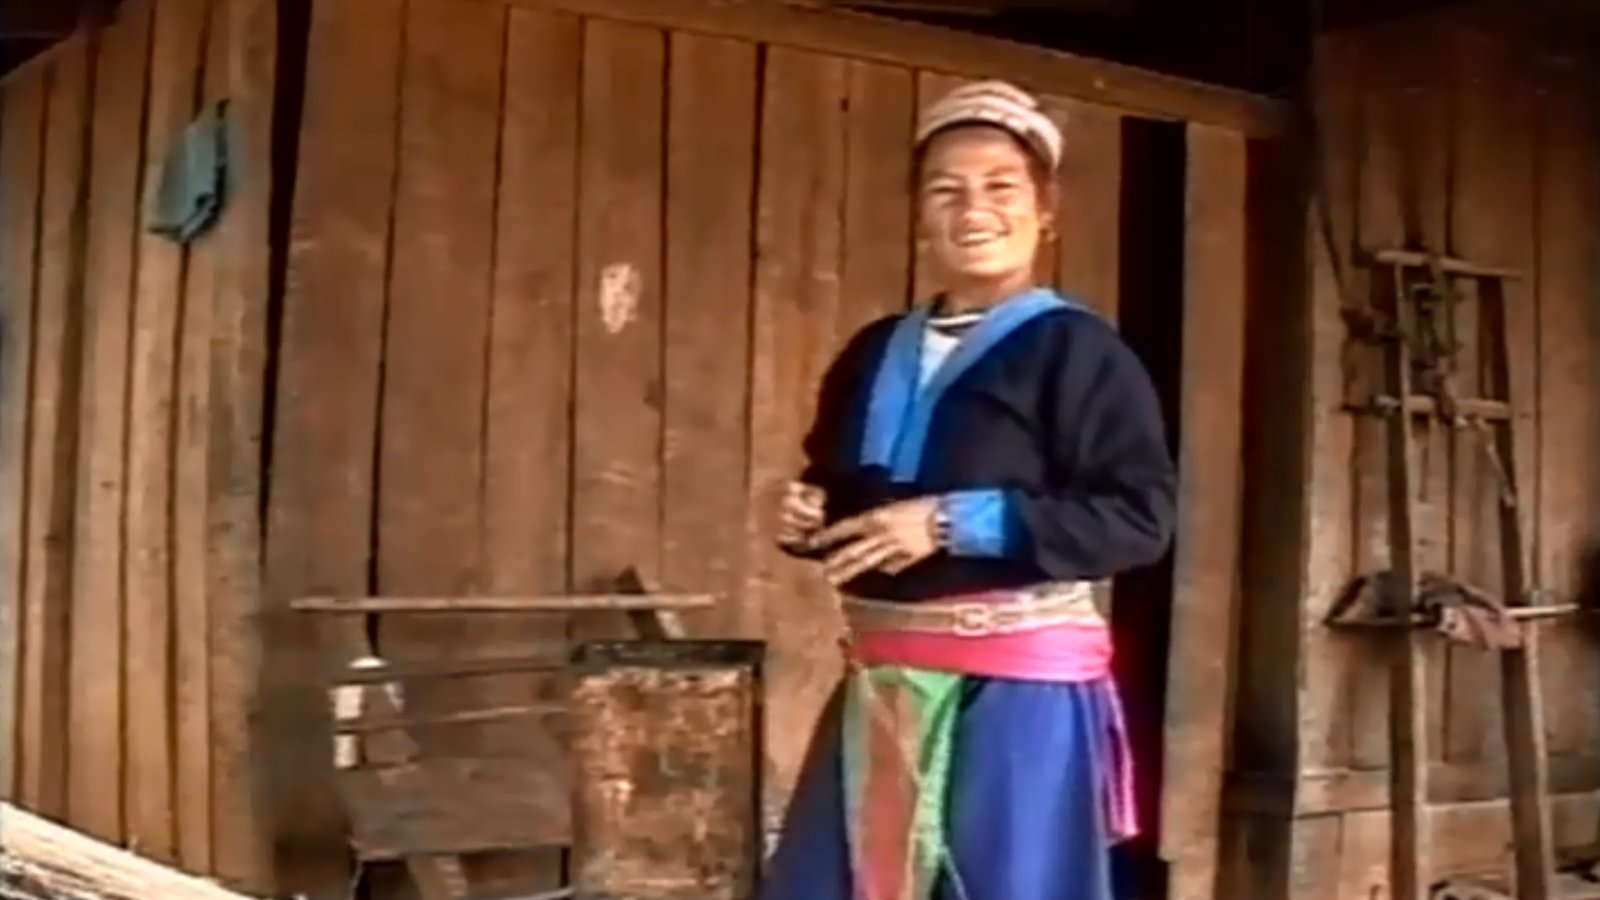 Threads of Life - Hemp And Gender In A Hmong Village